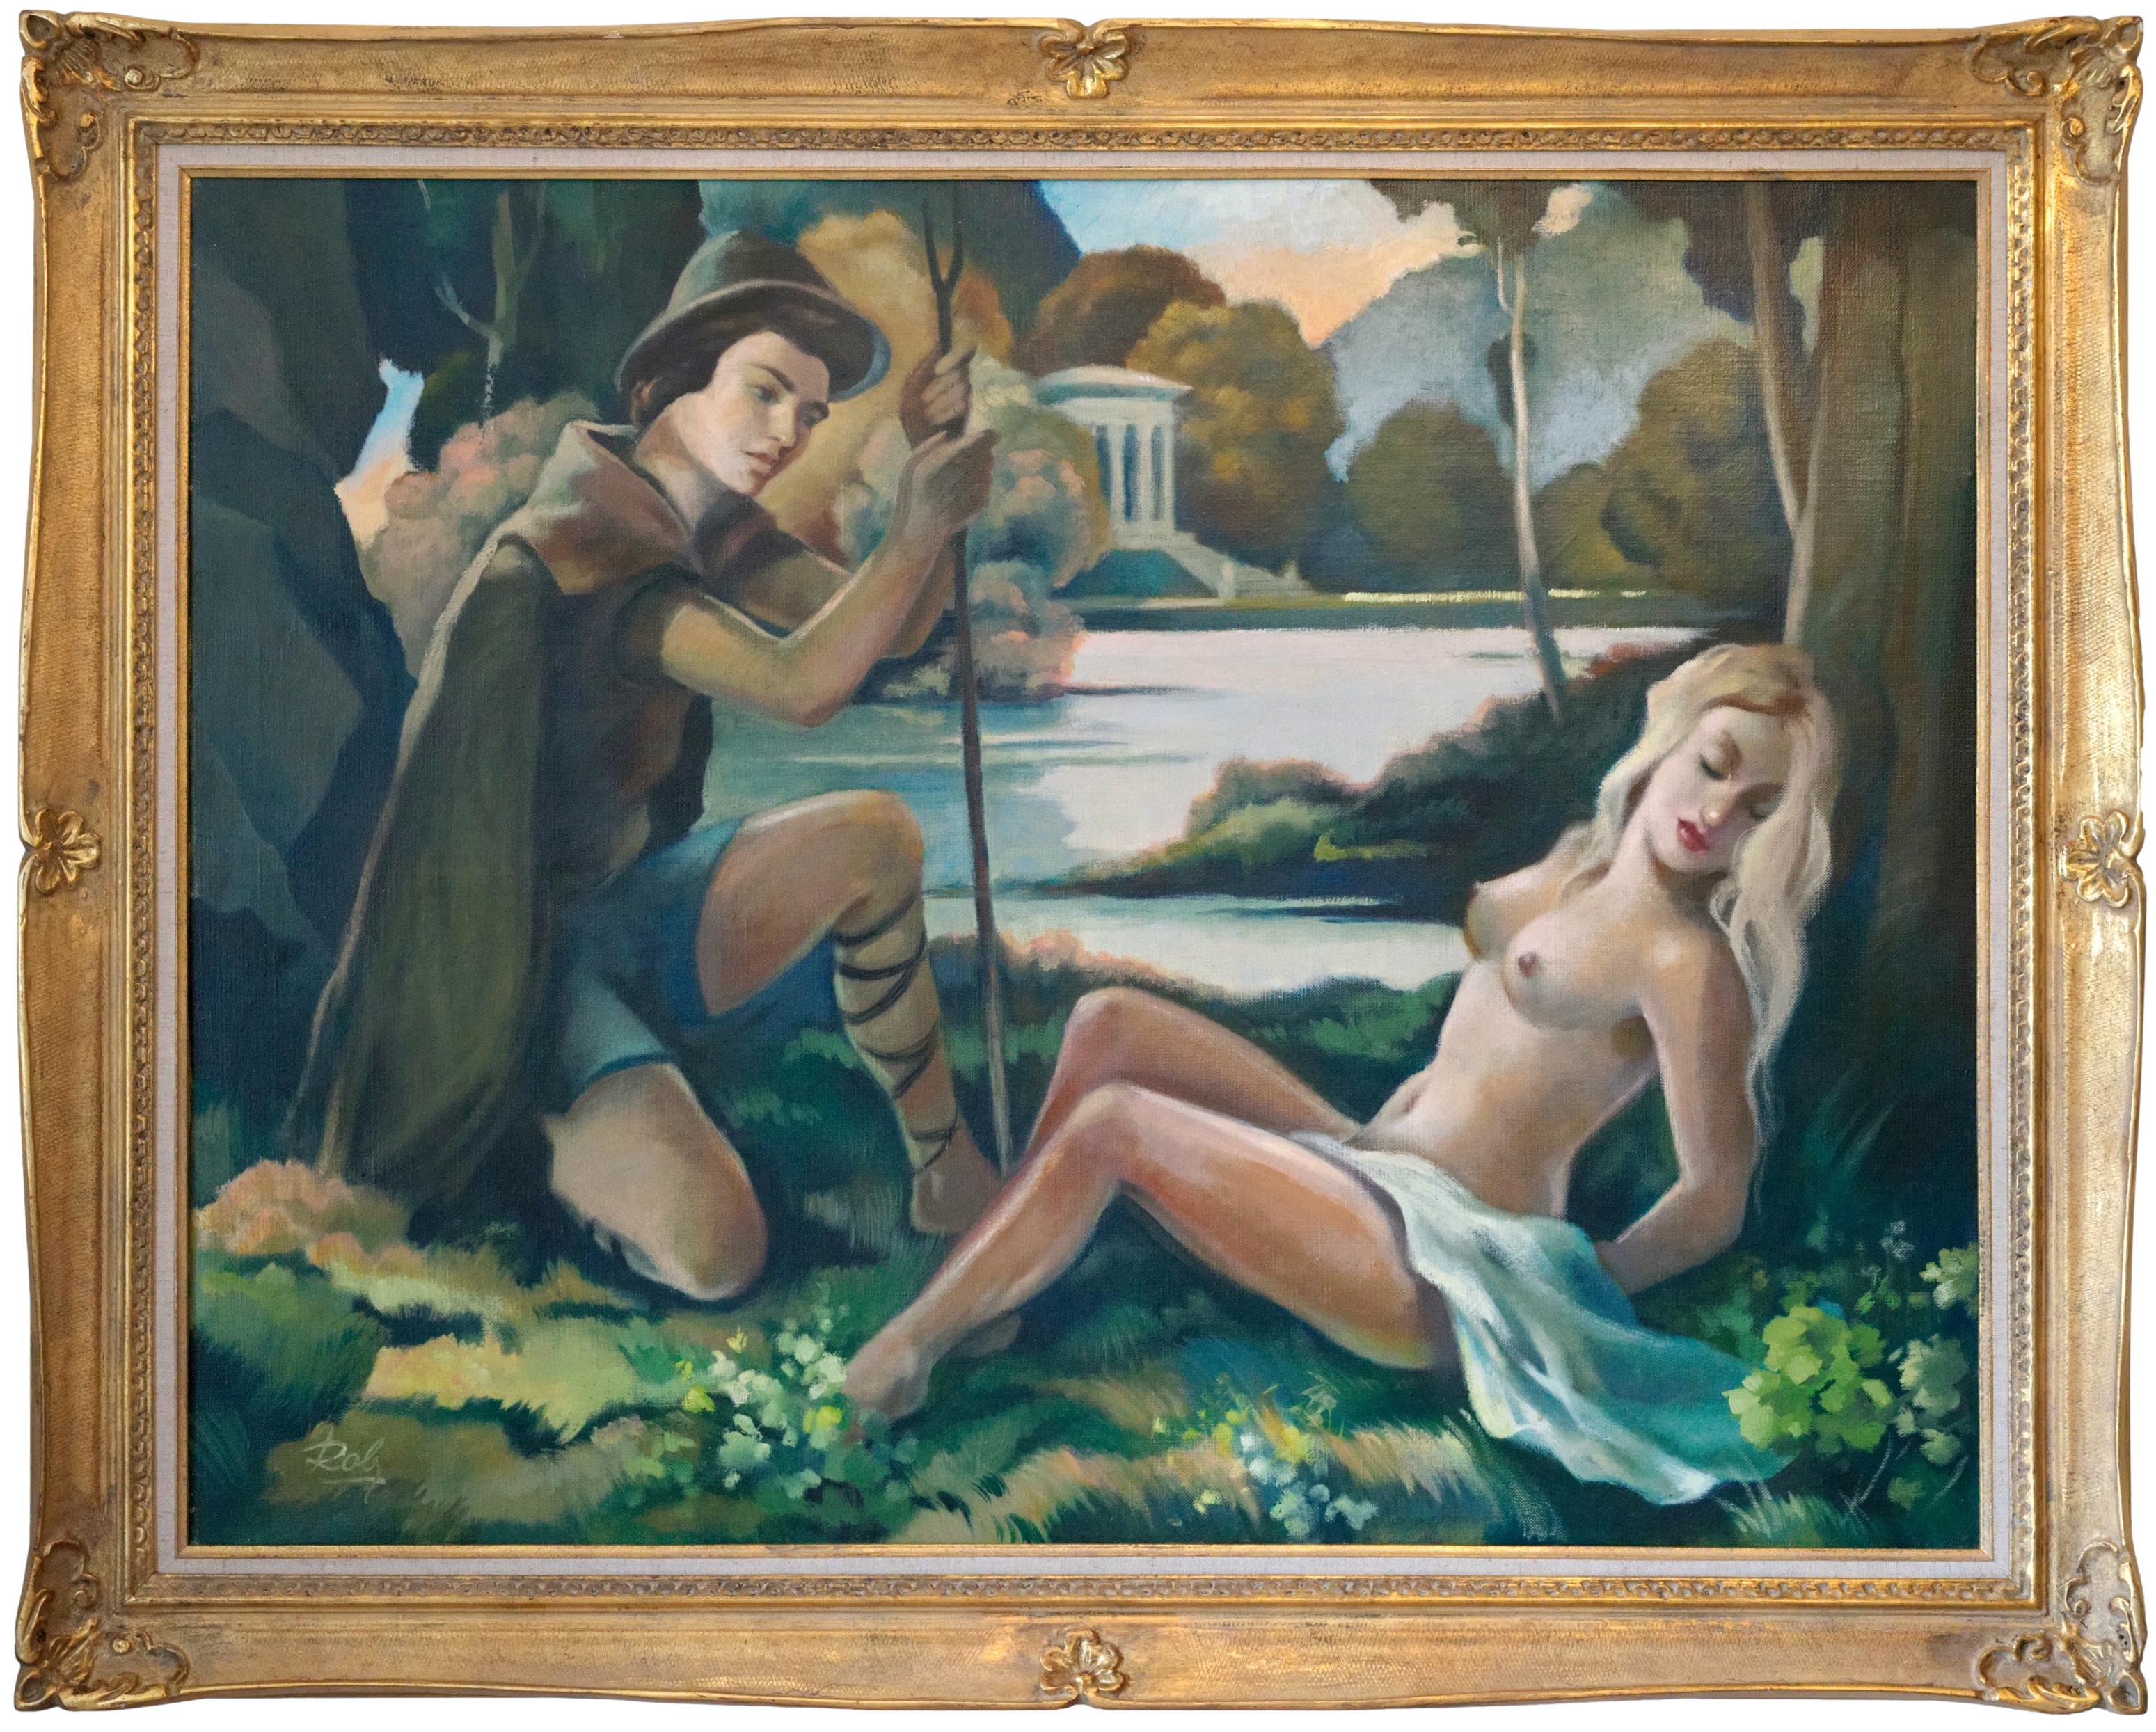 ROBJ, Large Oil on canvas, Wall Panel, Couple near the Pound, 1930